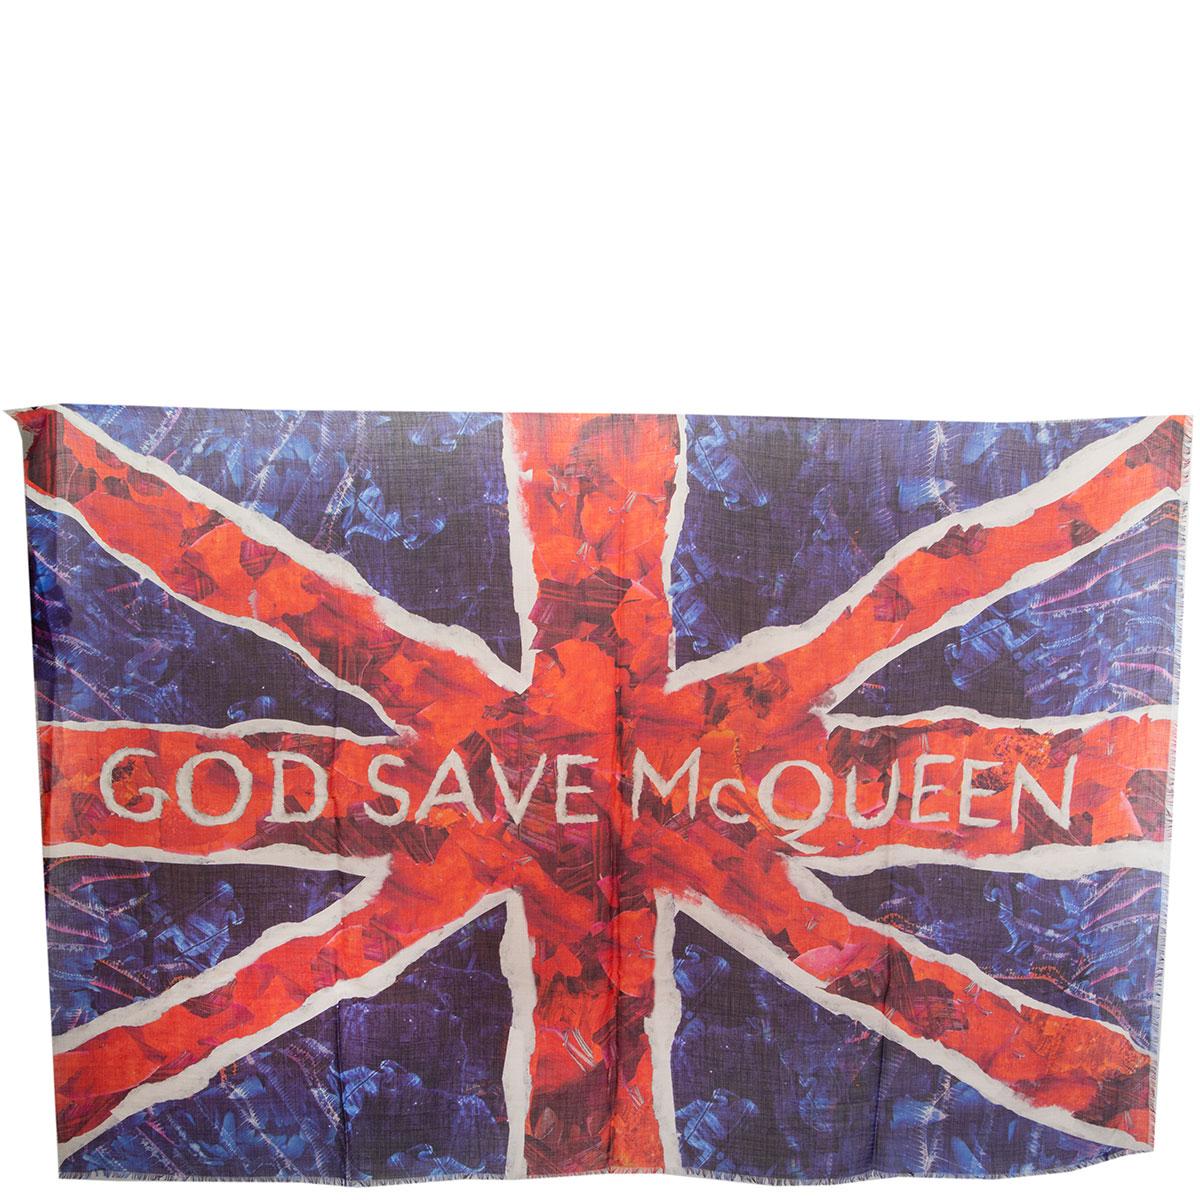 Alexander McQueen 'God Save The Queen' shawl in blue, navy, purple, red, burgundy, pink, magenta and off-white wool (50%) and silk (50%). Has been worn and is in excellent condition. 

Width 127cm (49.5in)
Length 194cm (75.7in)
